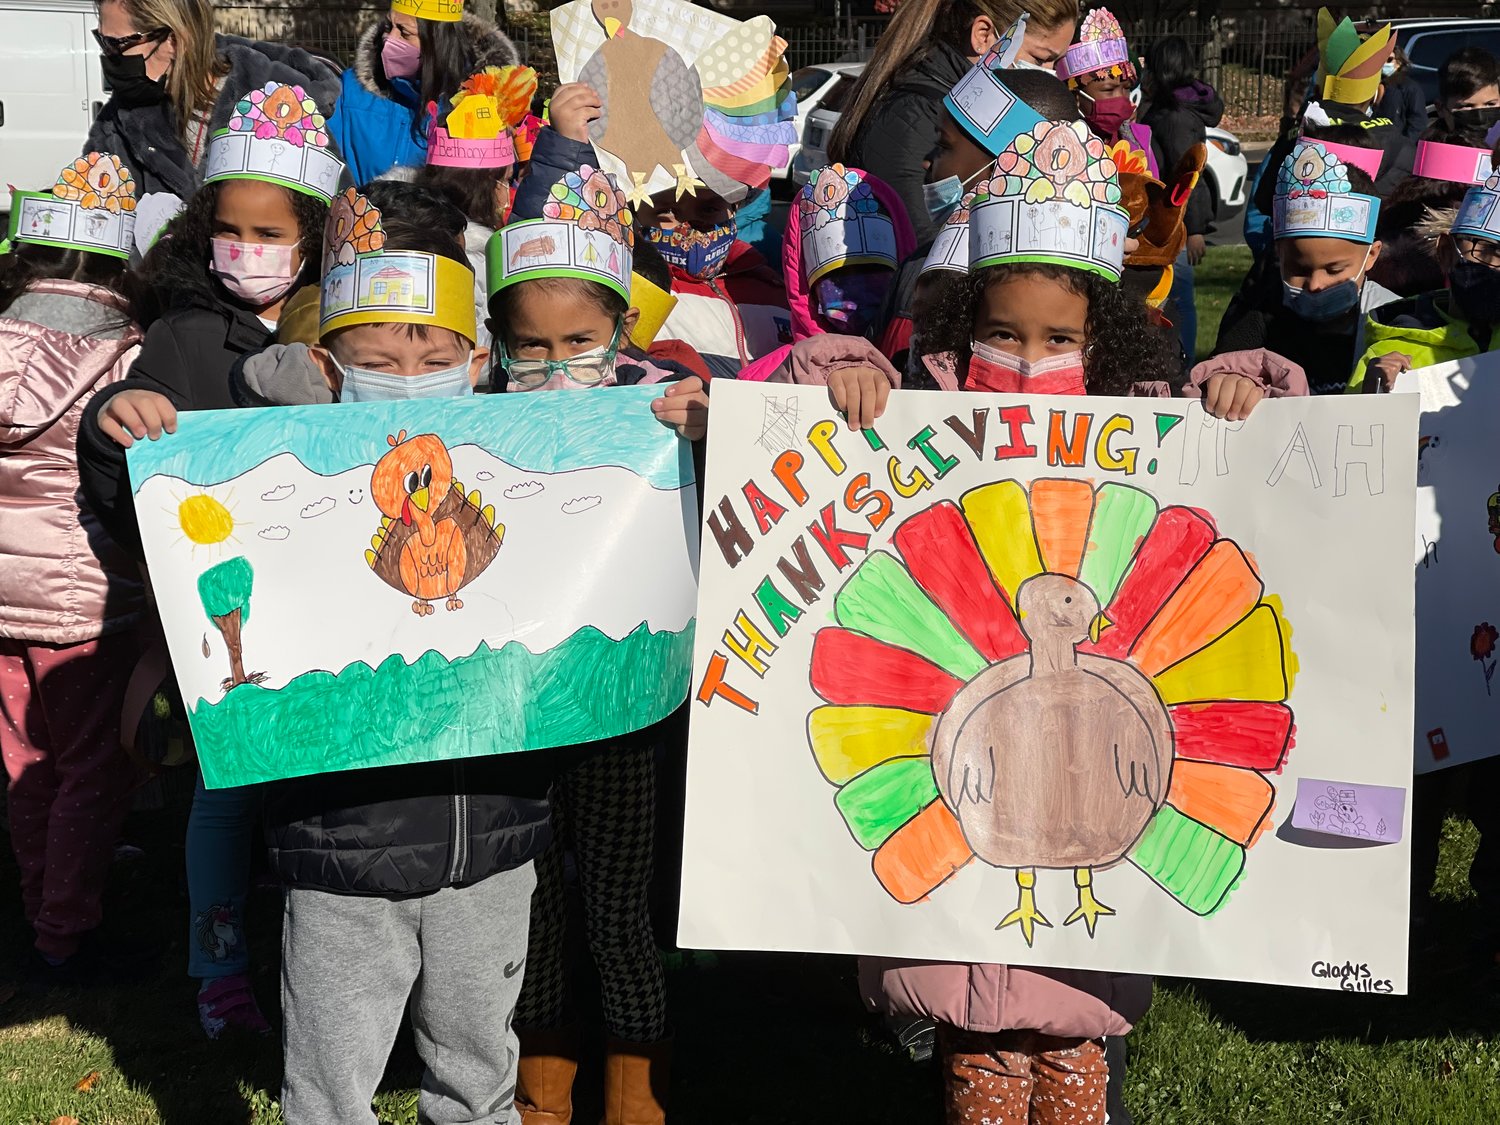 Bayview Avenue Elementary School students participated in the school's annual Turkey Trot fundraising event to help those less fortunate.